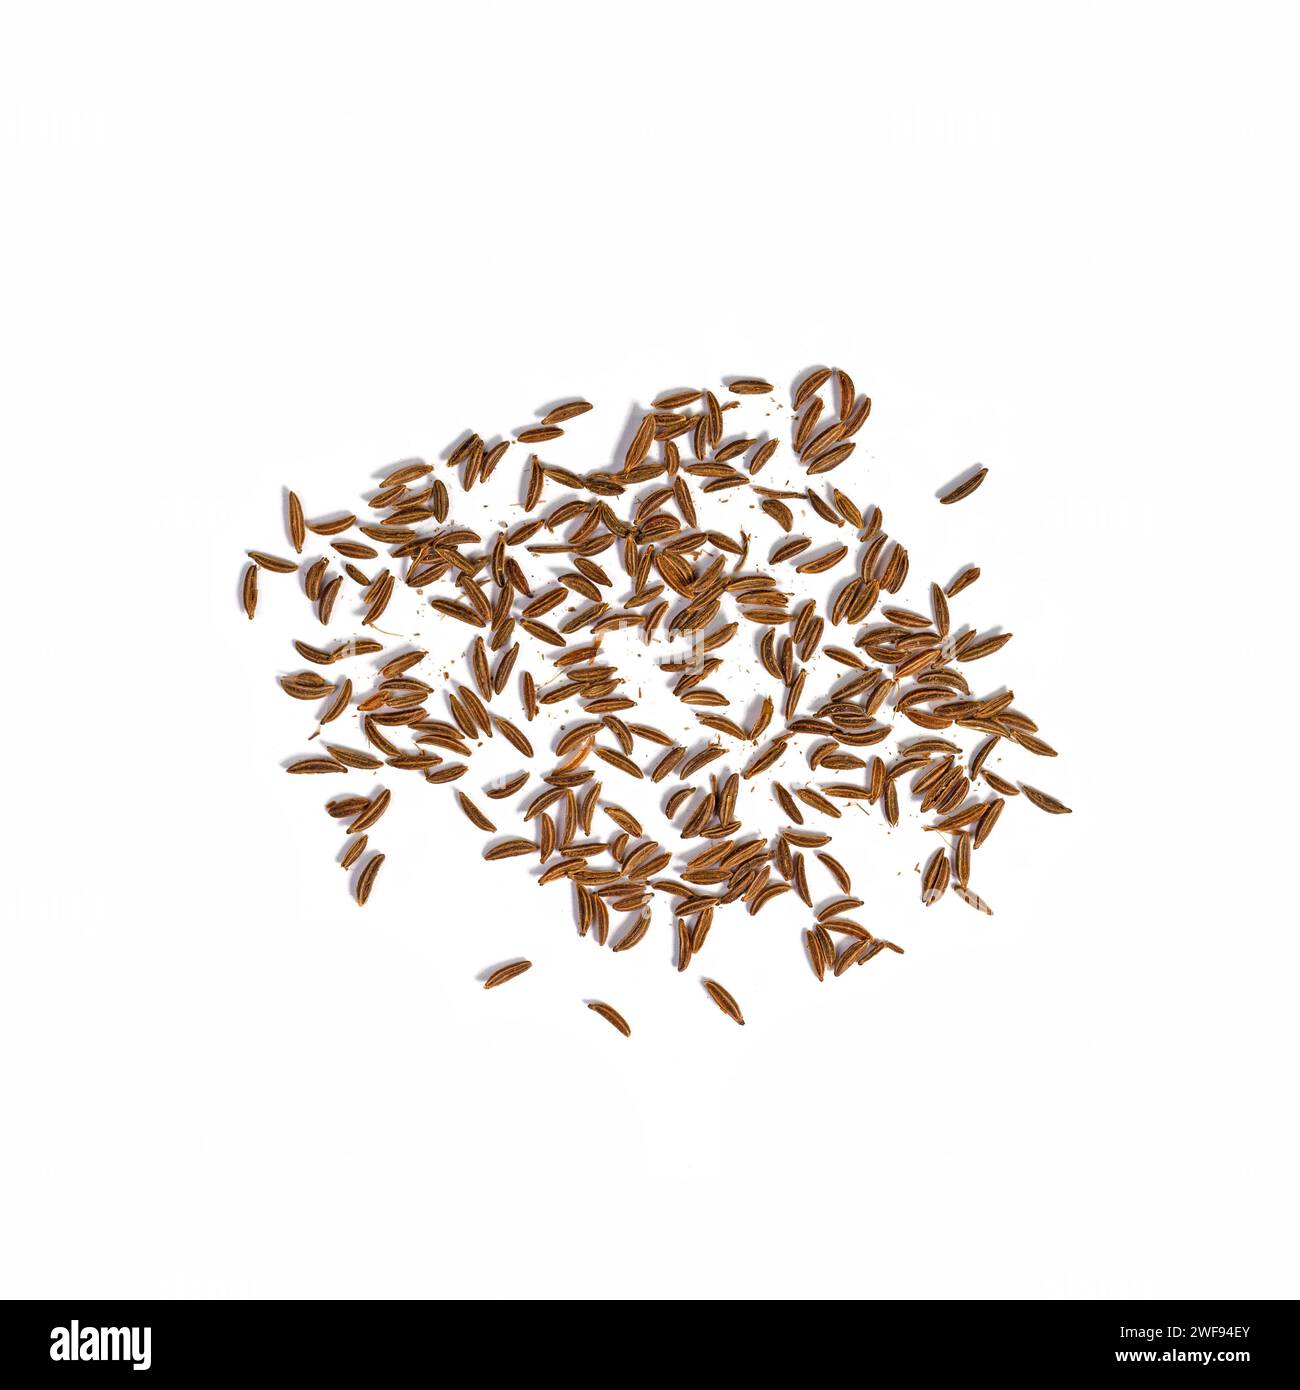 Cumin seeds against a white background Stock Photo